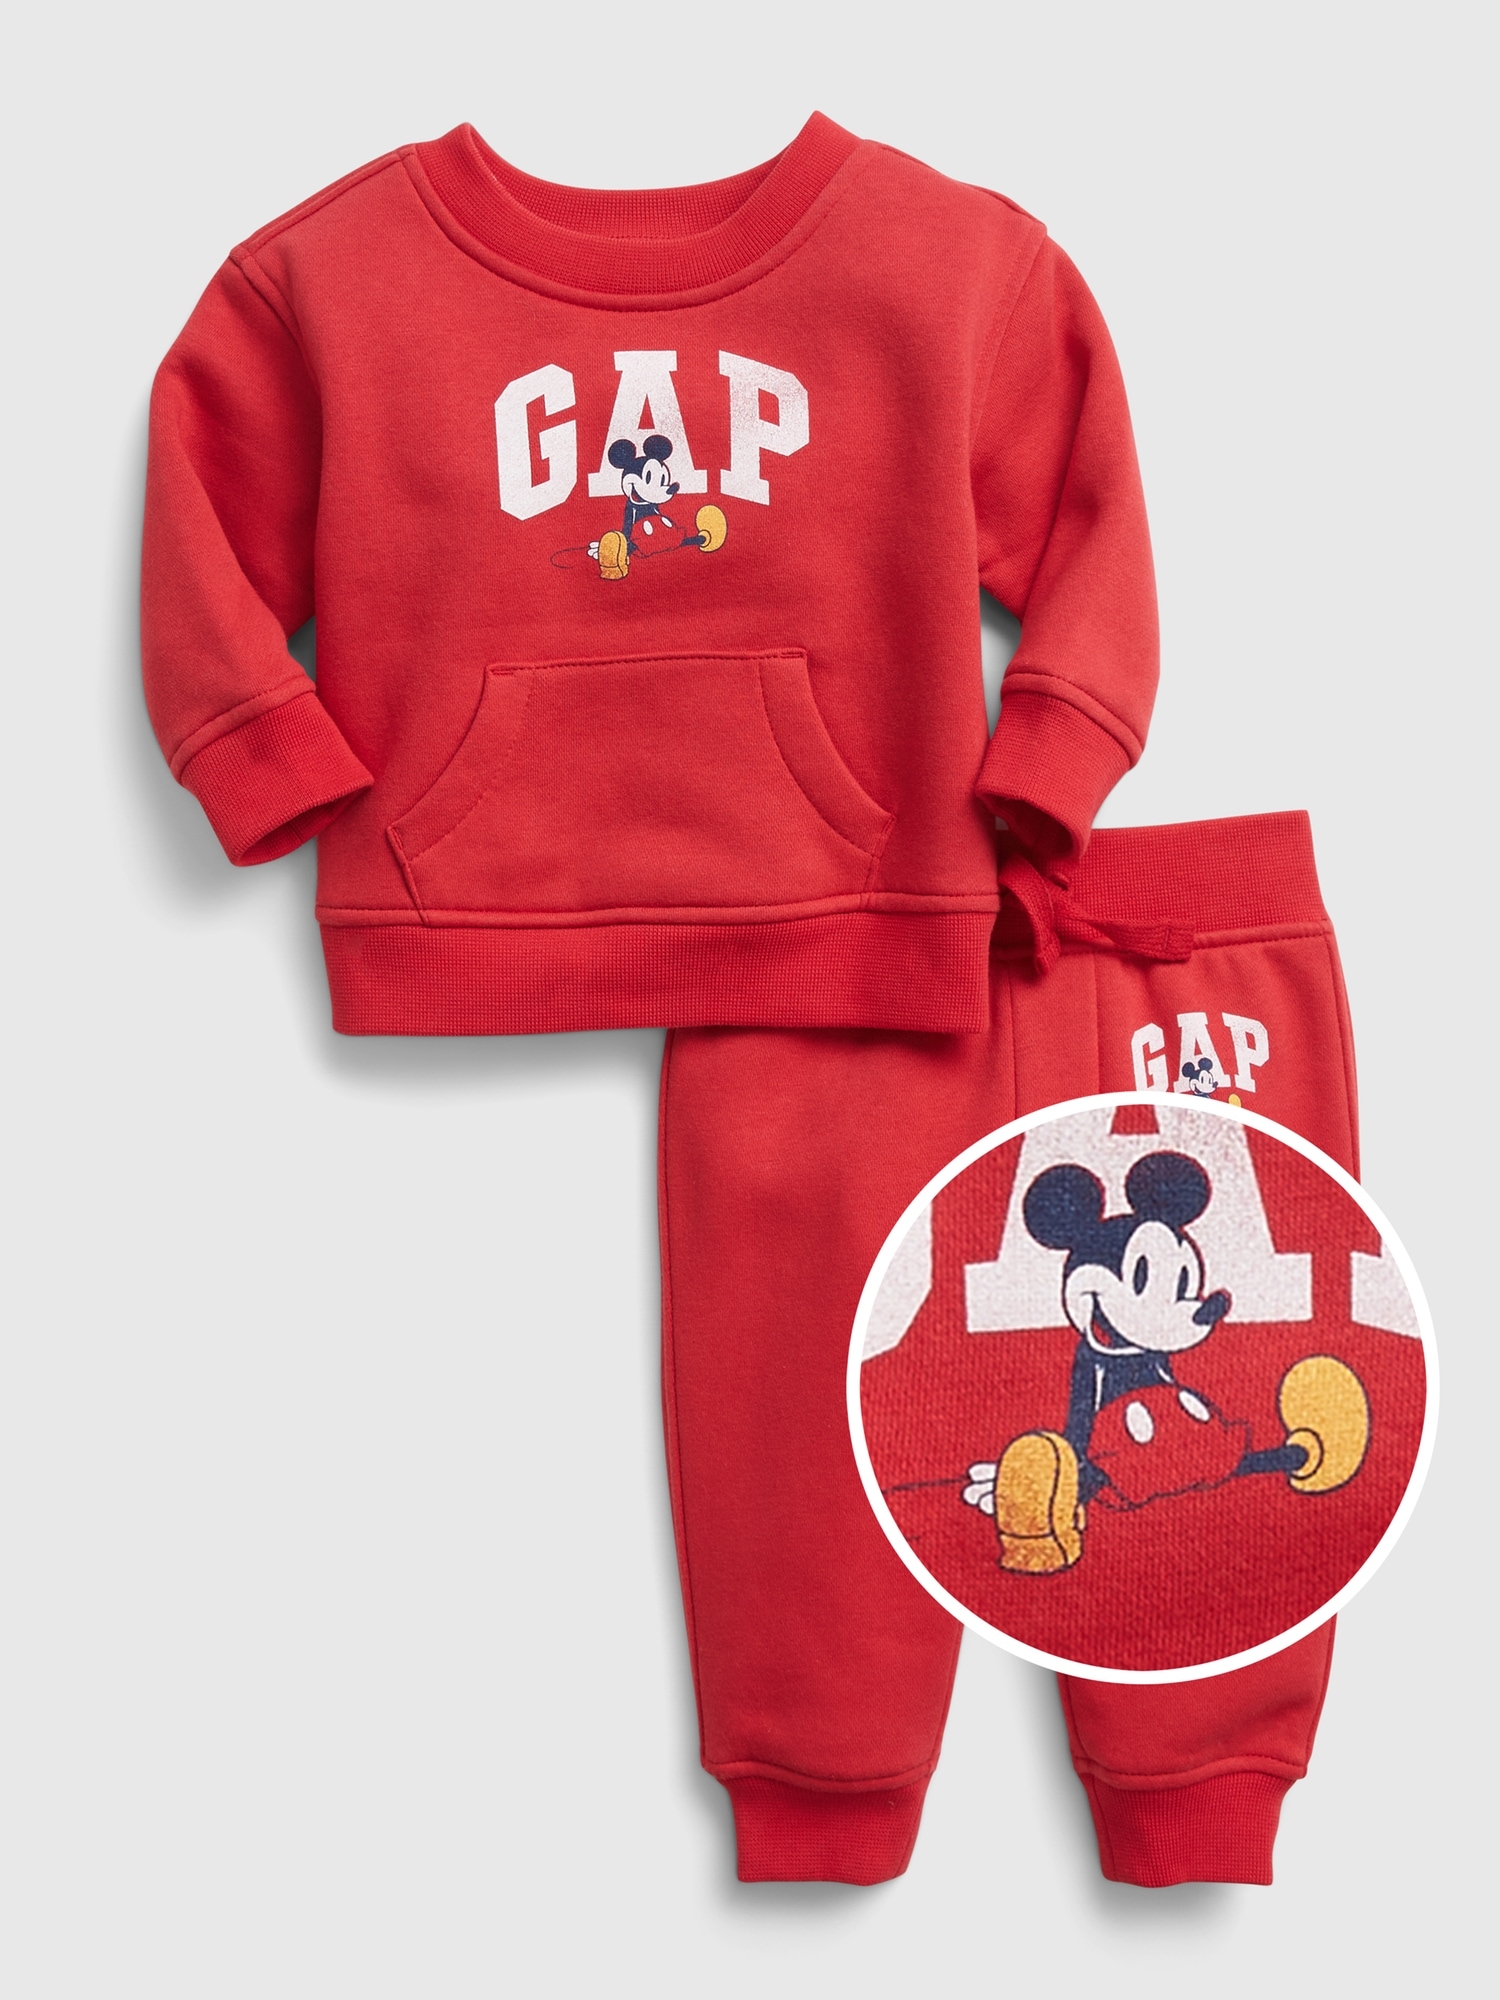 Gap × Disney Baby Graphic Outfit Set